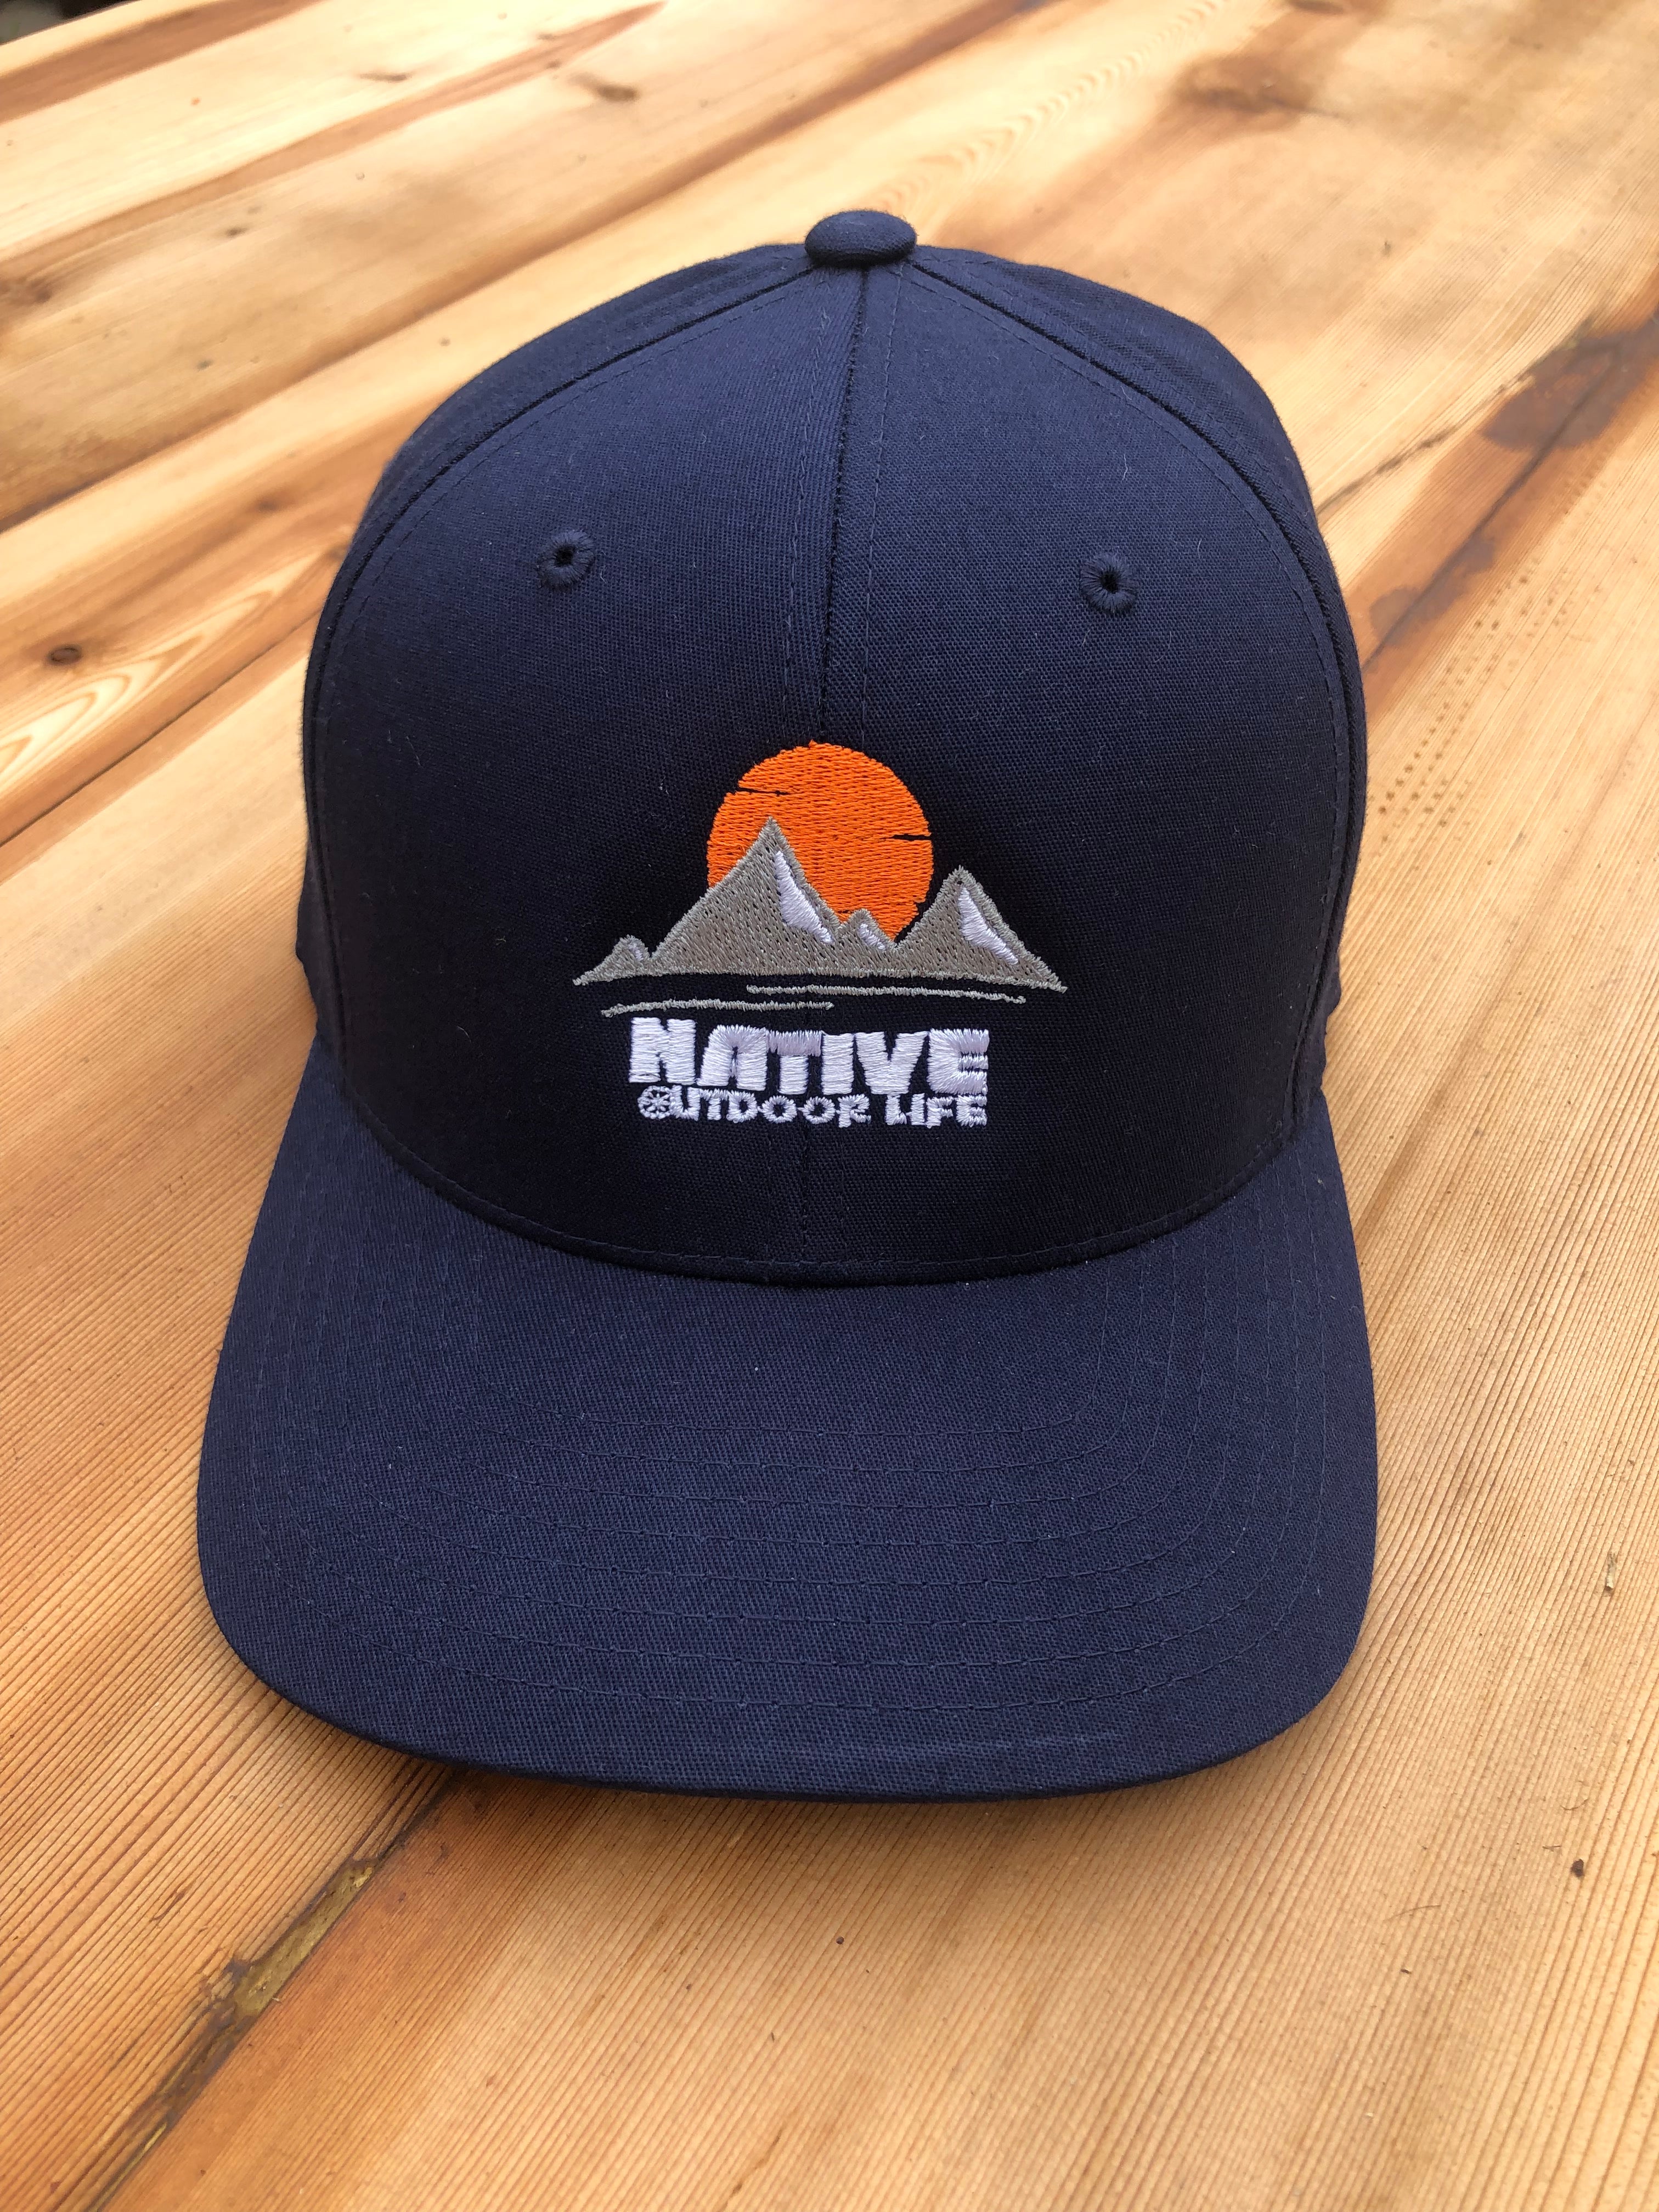 Native Outdoor Life Company Logo - Flex Fit Navy Caps - Embroidered